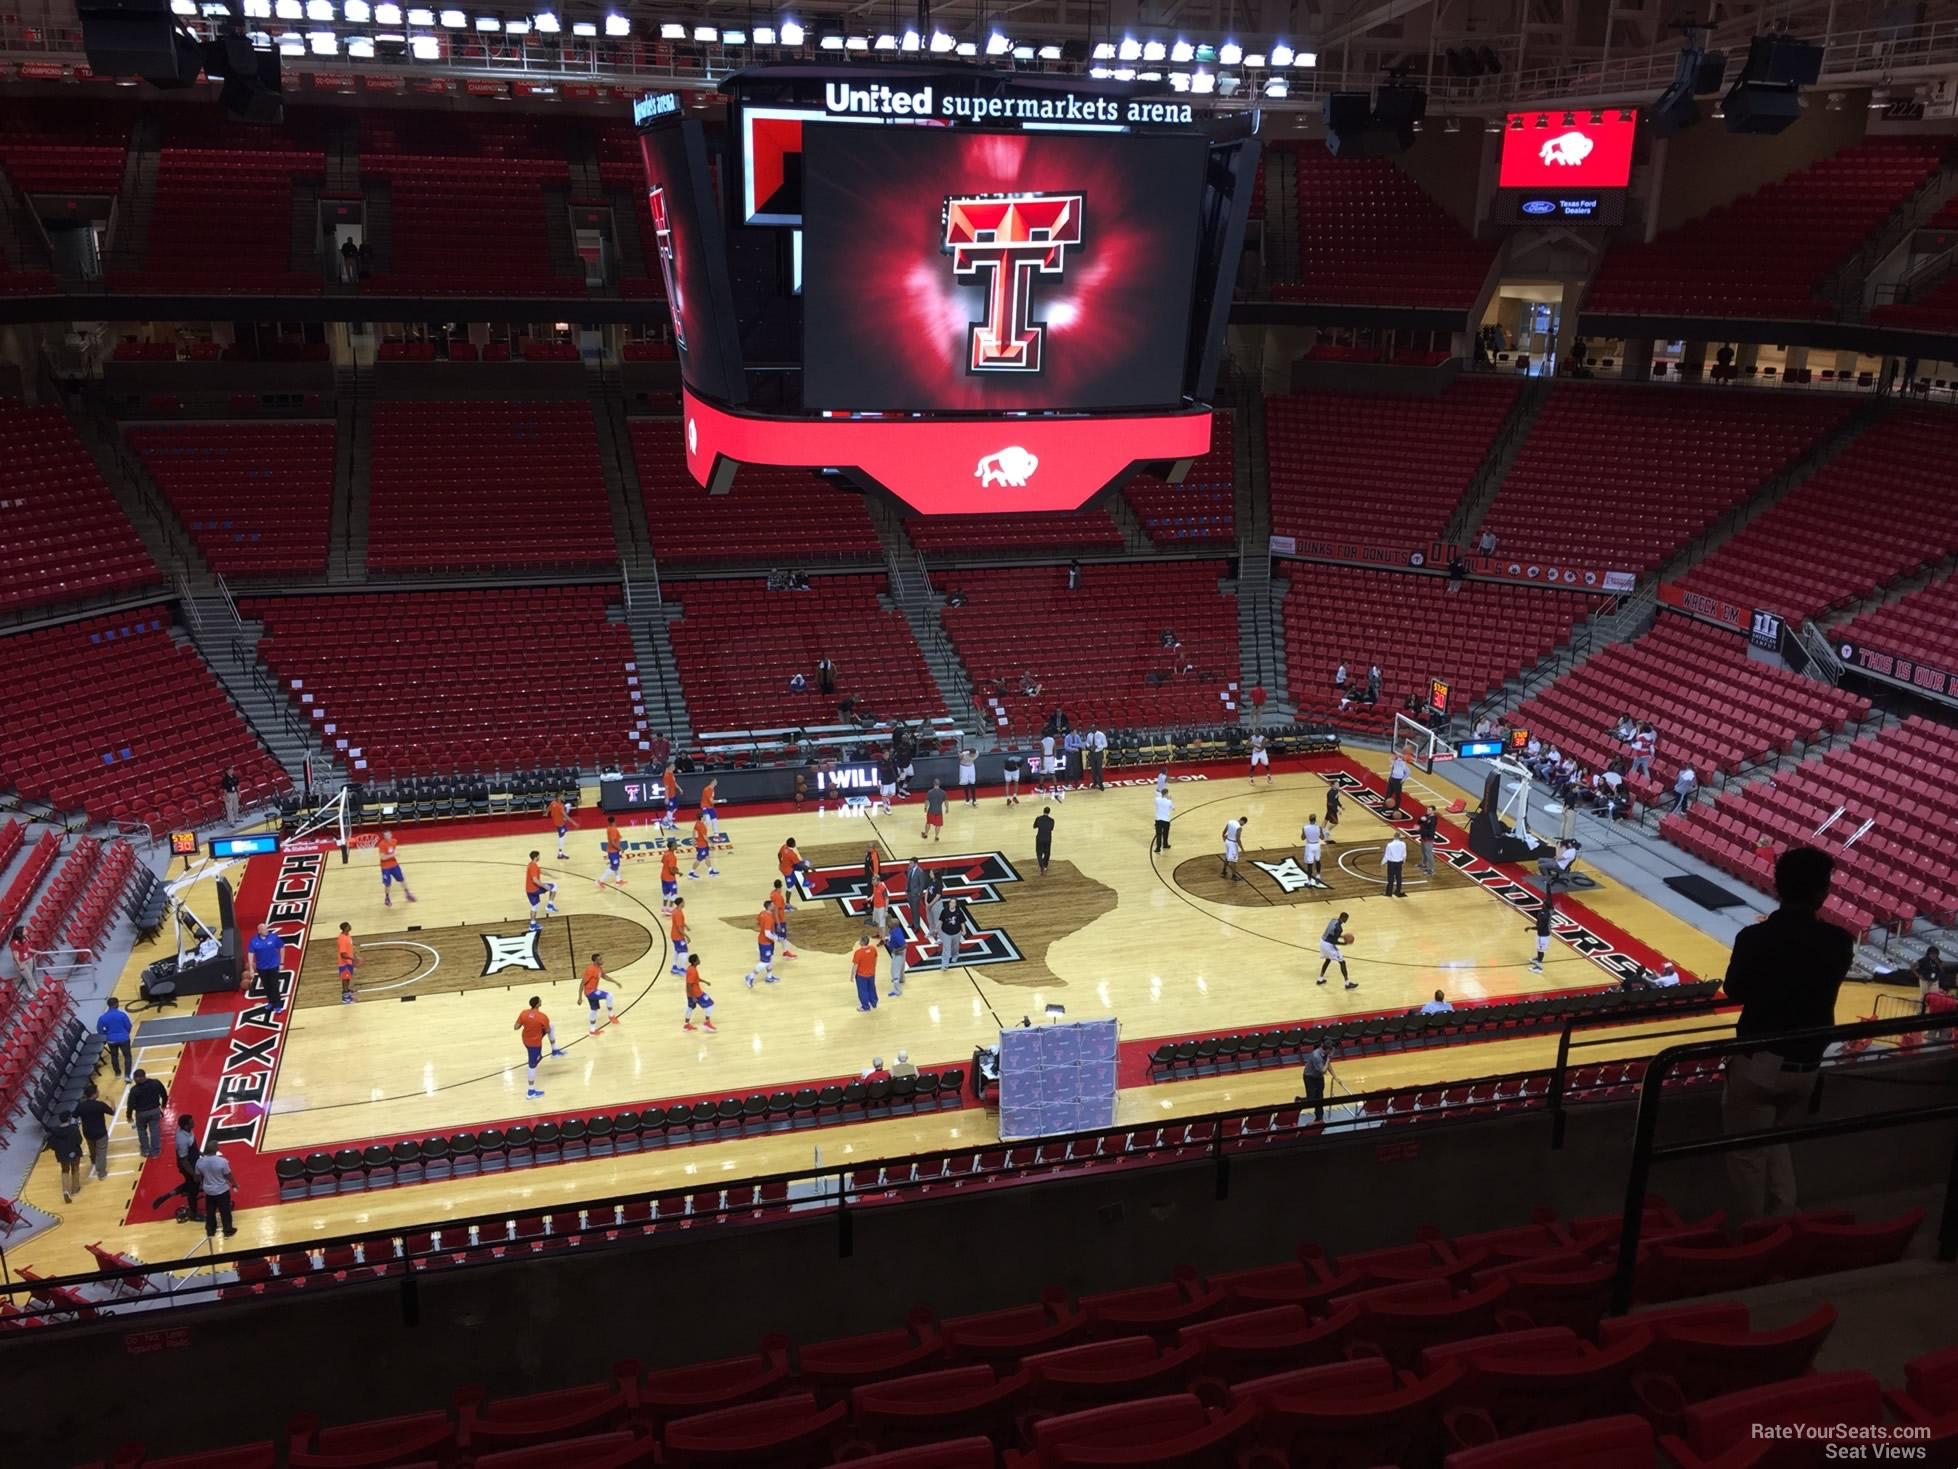 section 202, row 7 seat view  - united supermarkets arena